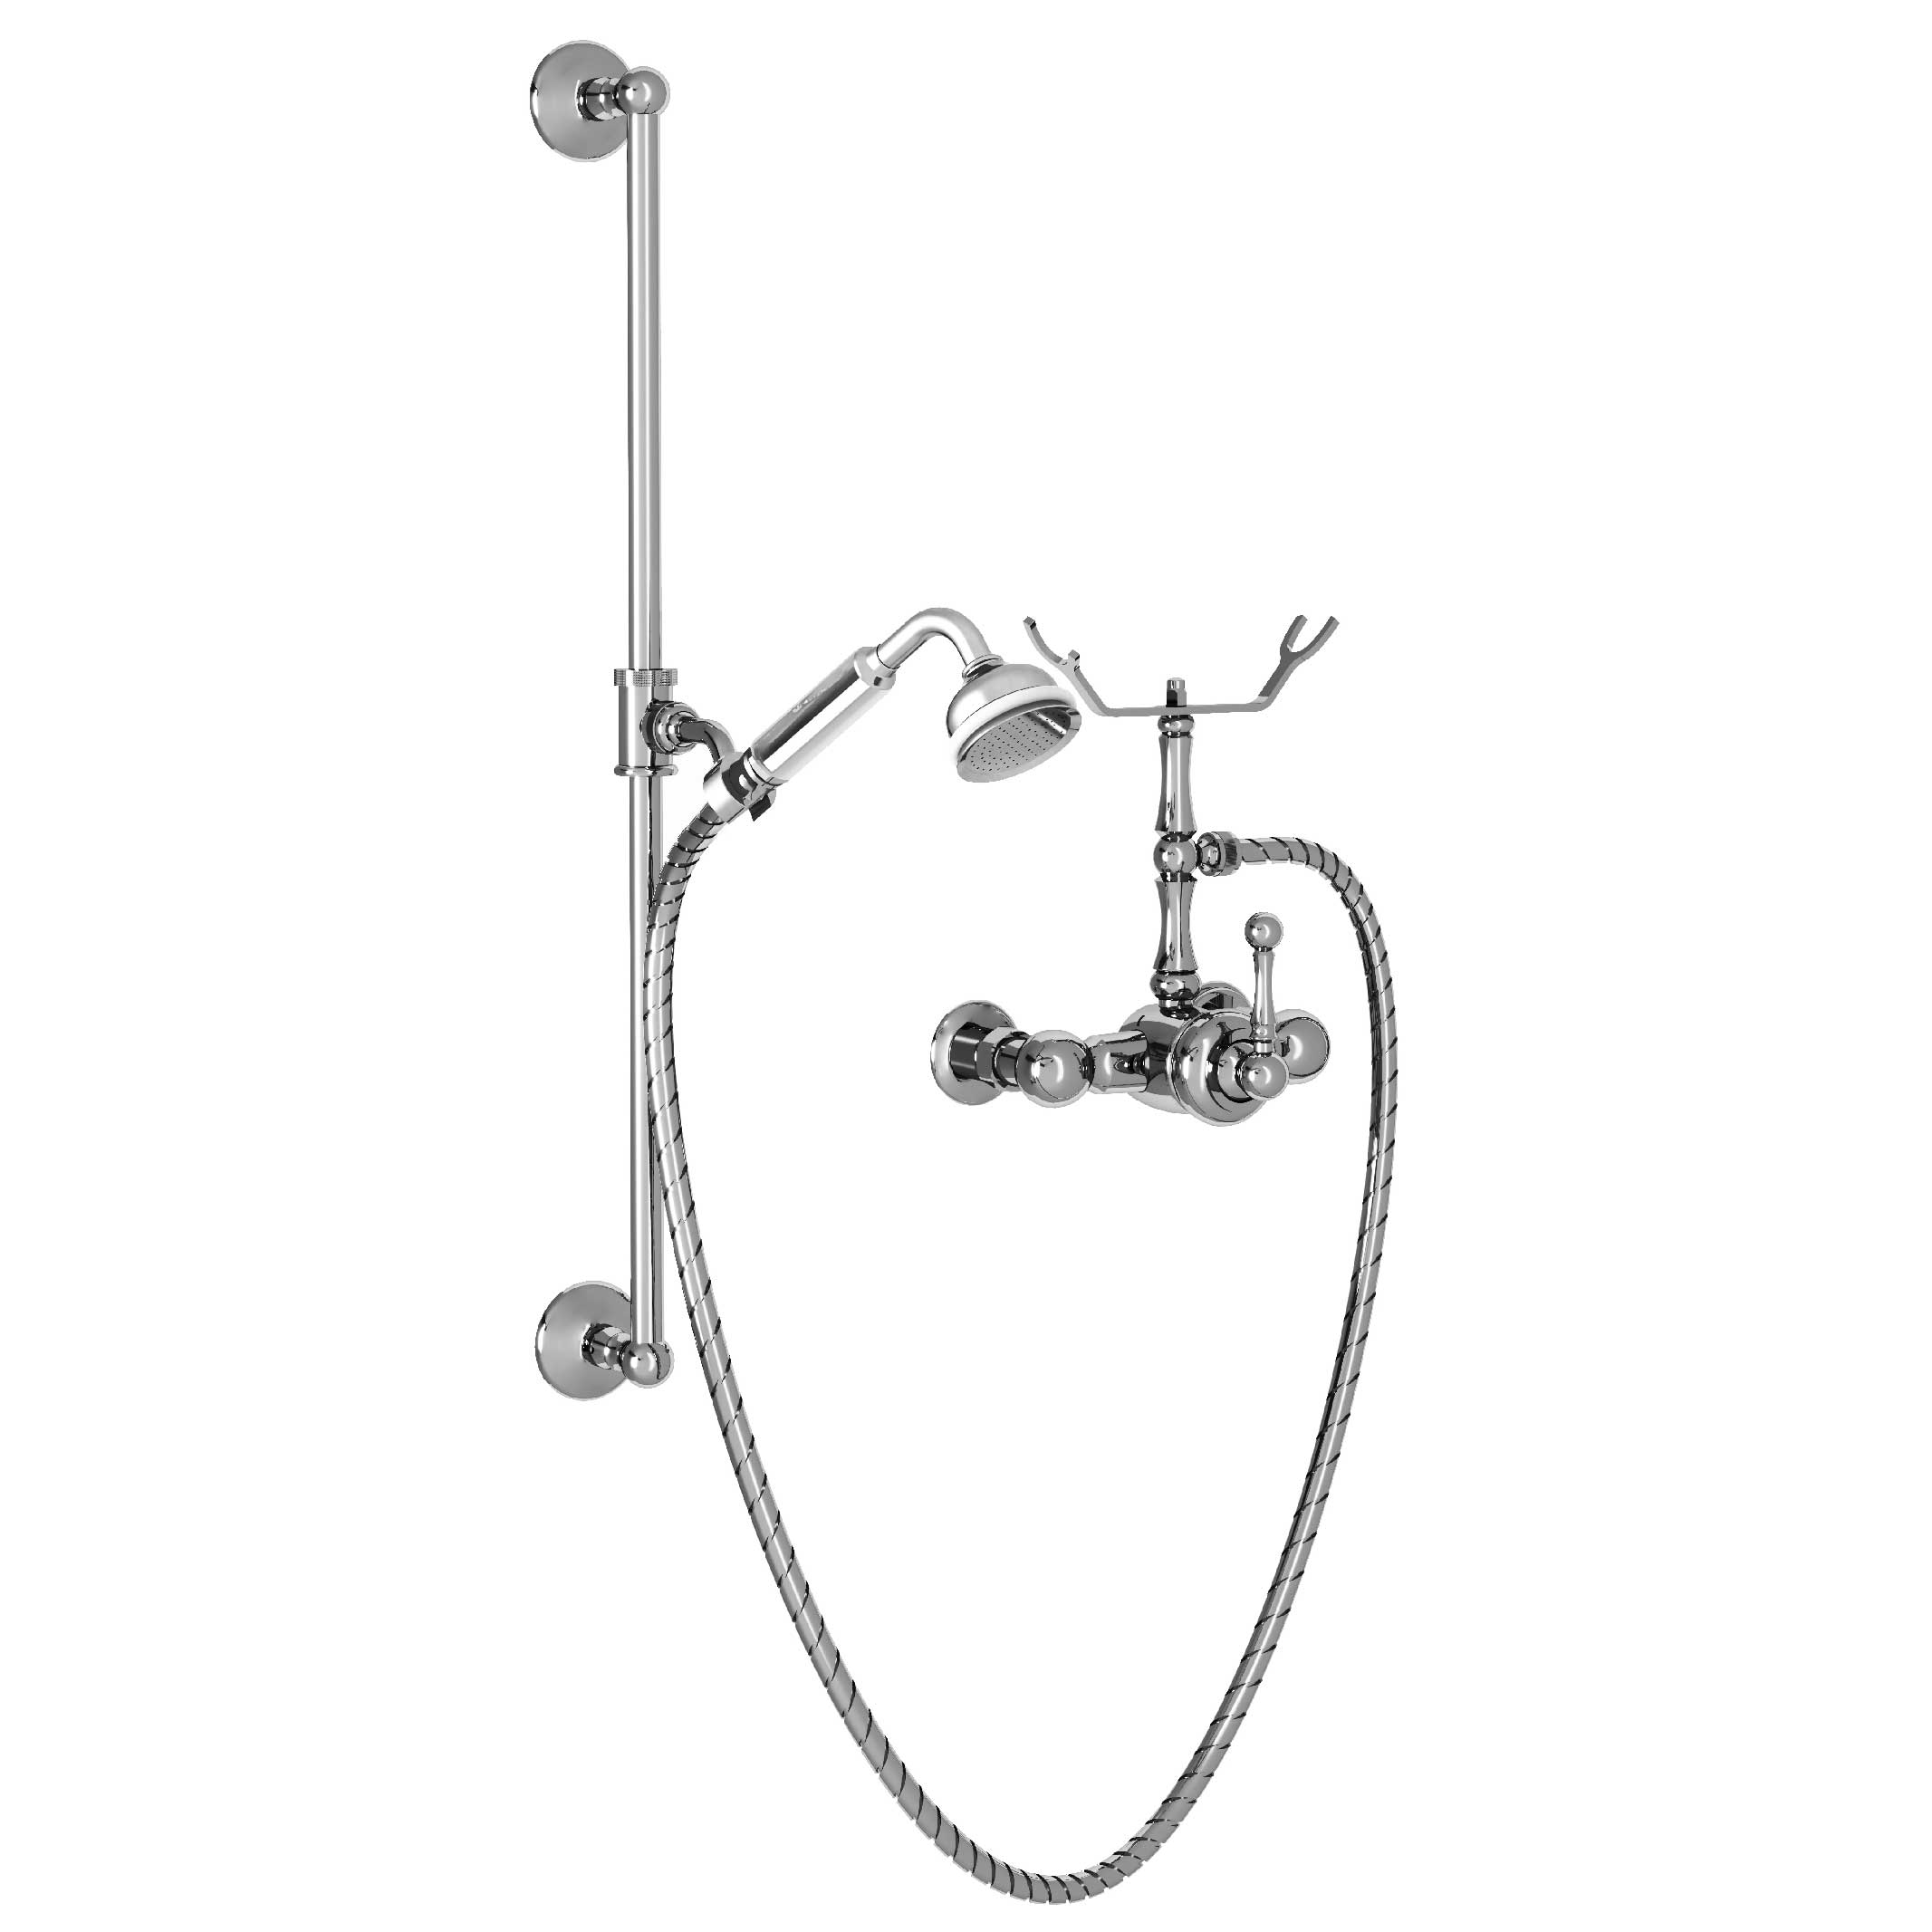 M40-2202M Single-lever shower mixer with sliding bar